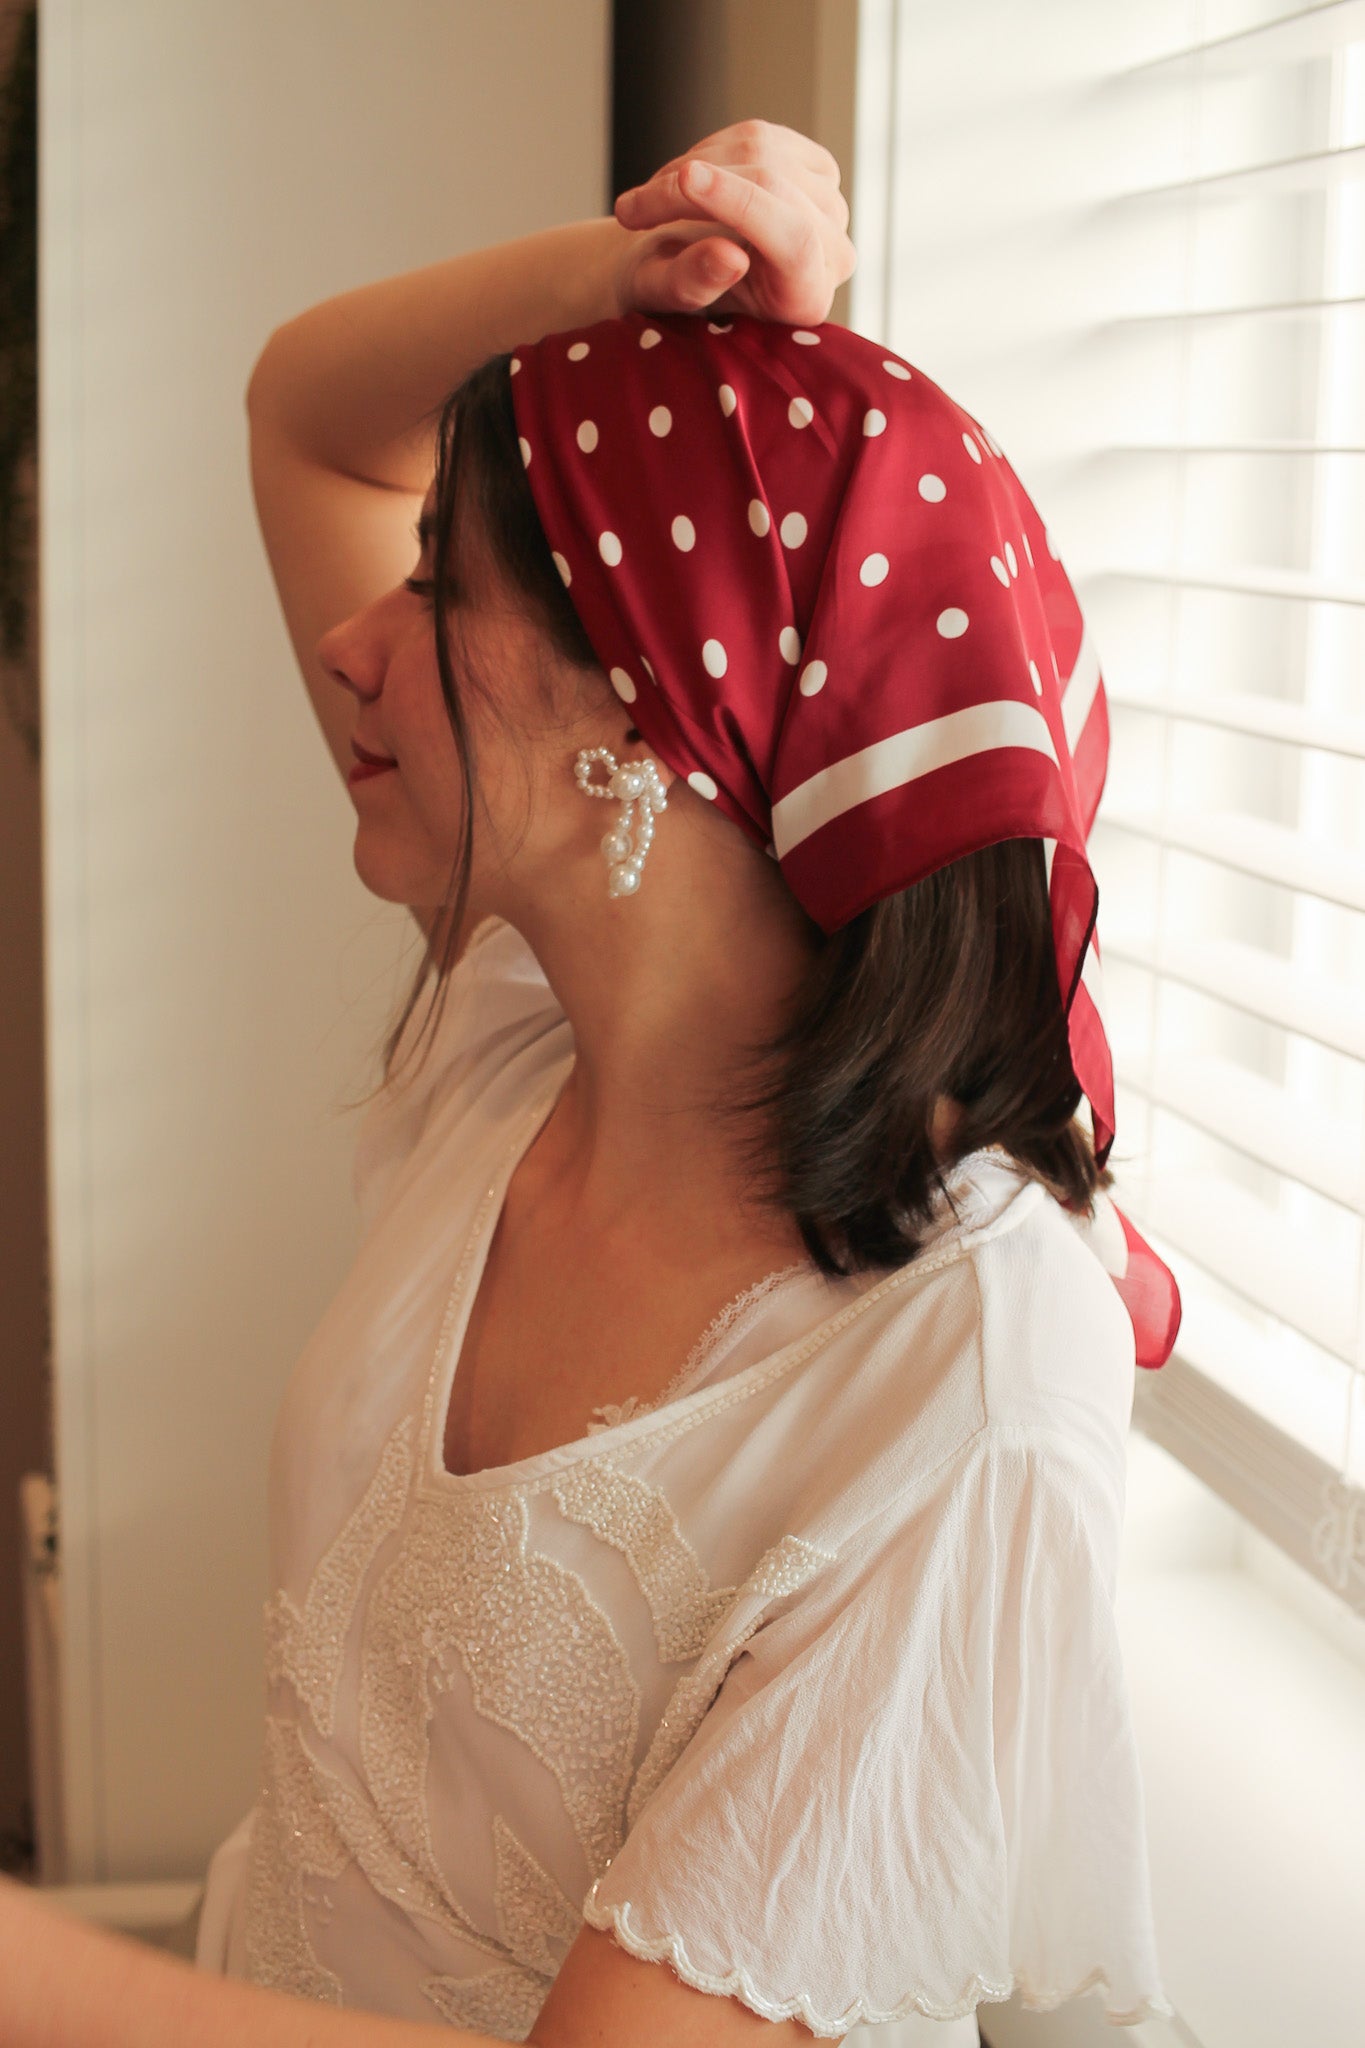 Audrey Bandana in Red and White Dots